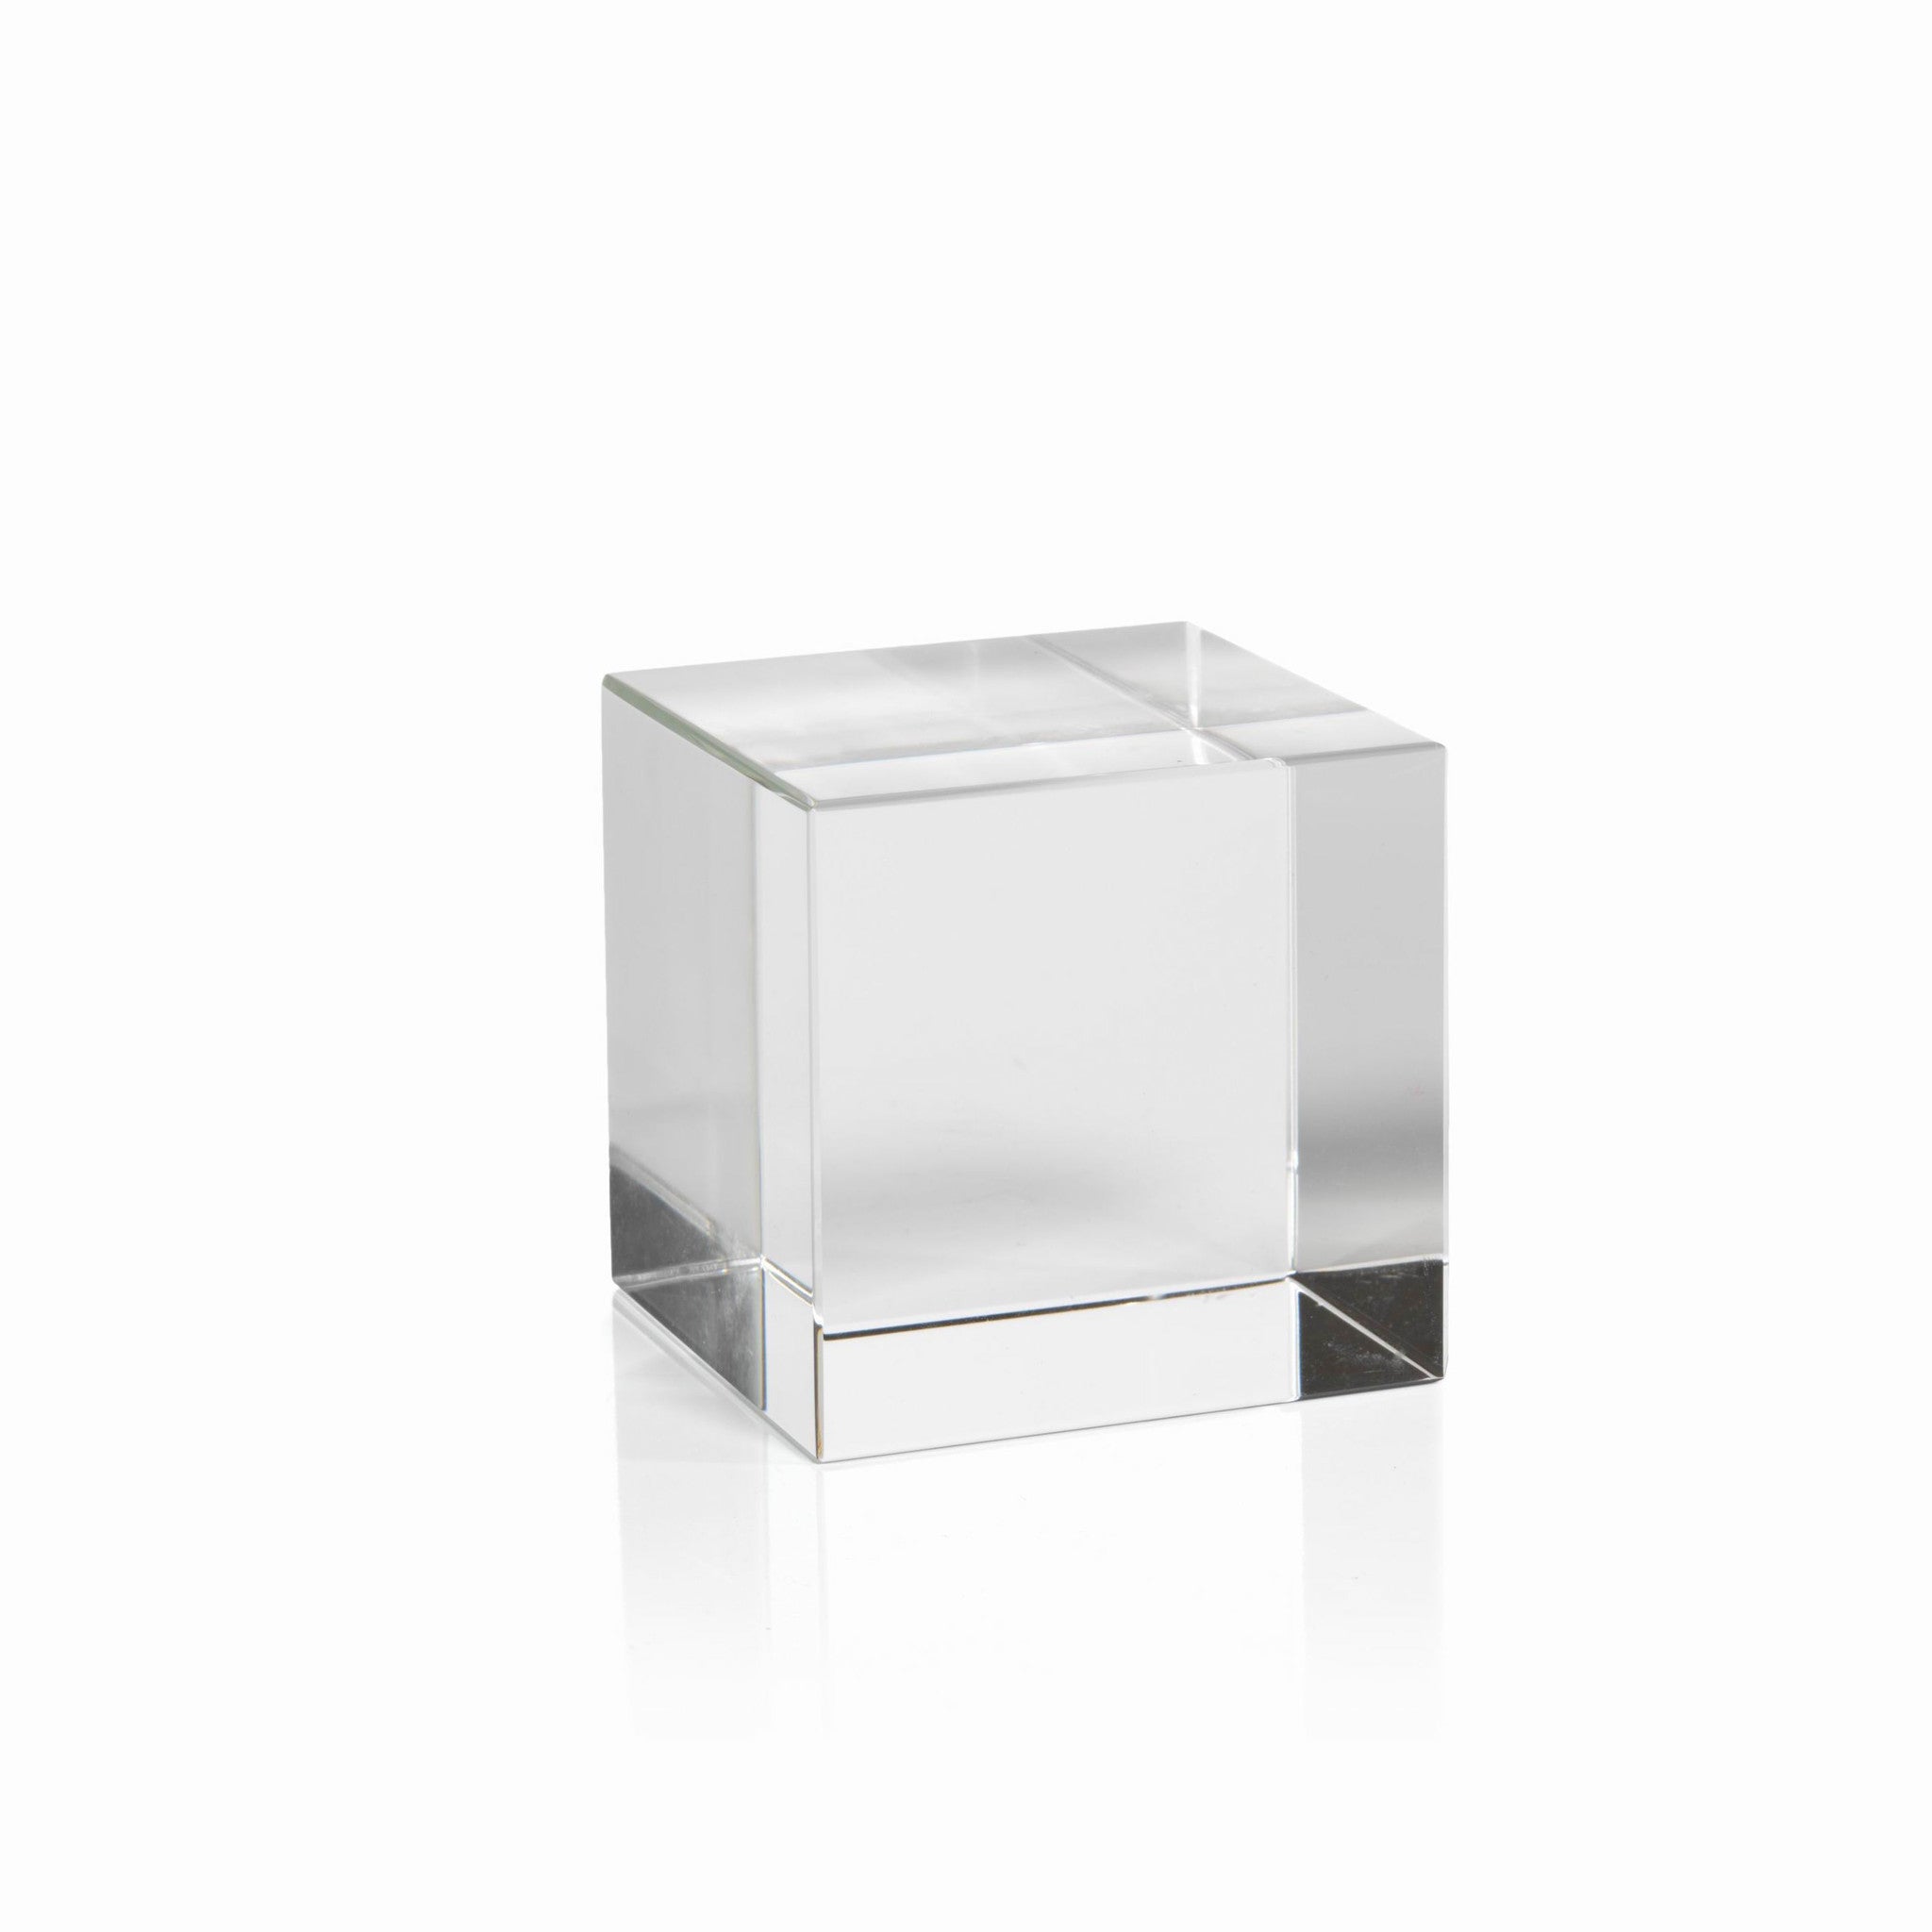 Crystal Glass Cube - CARLYLE AVENUE